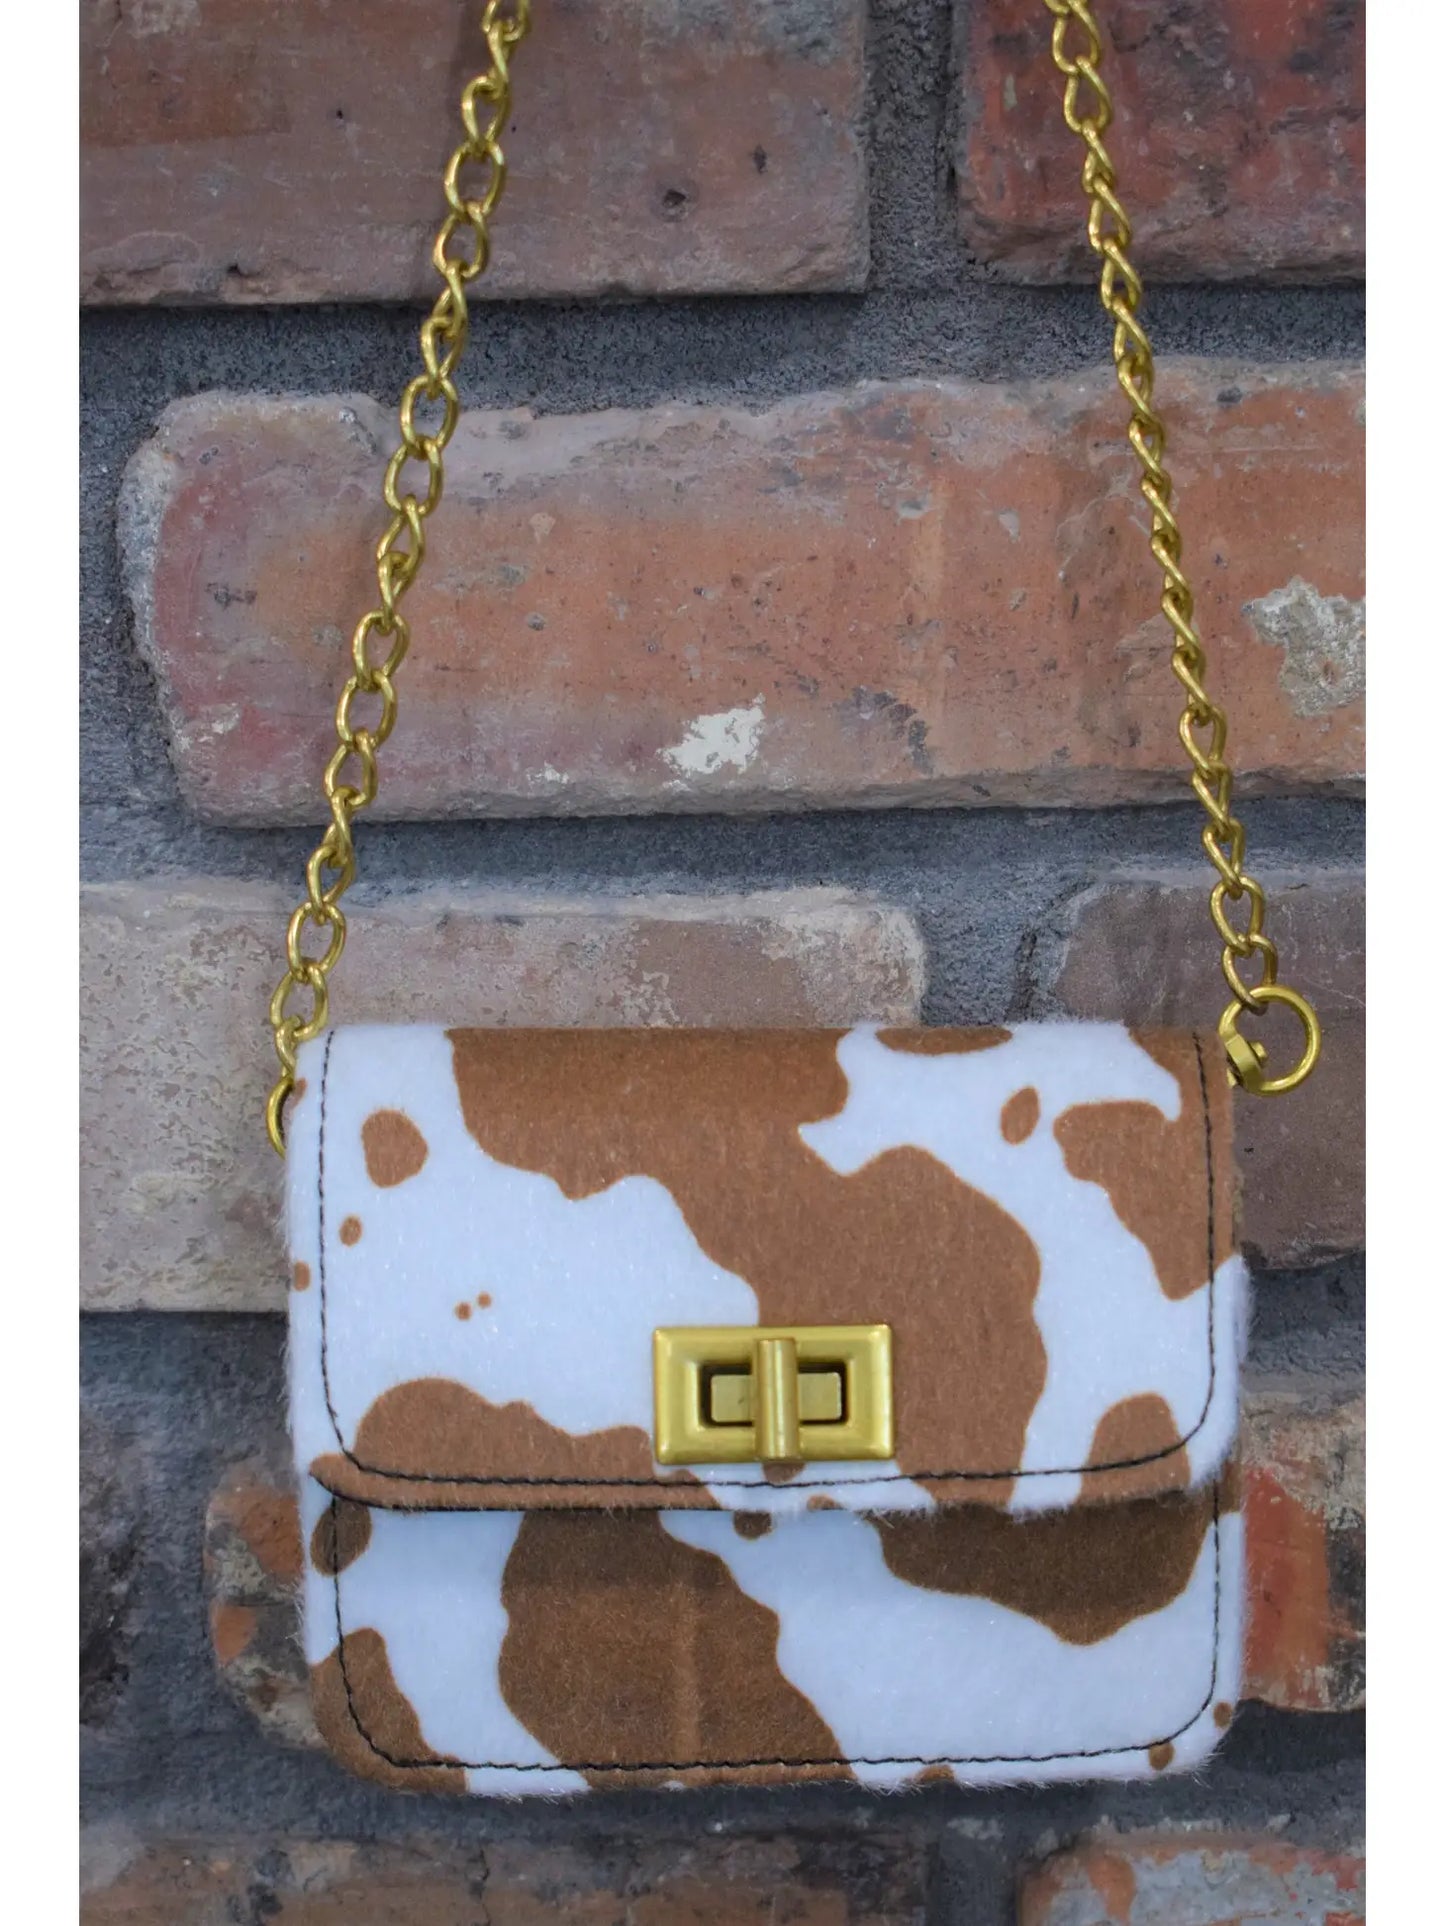 Purse with Gold Chain